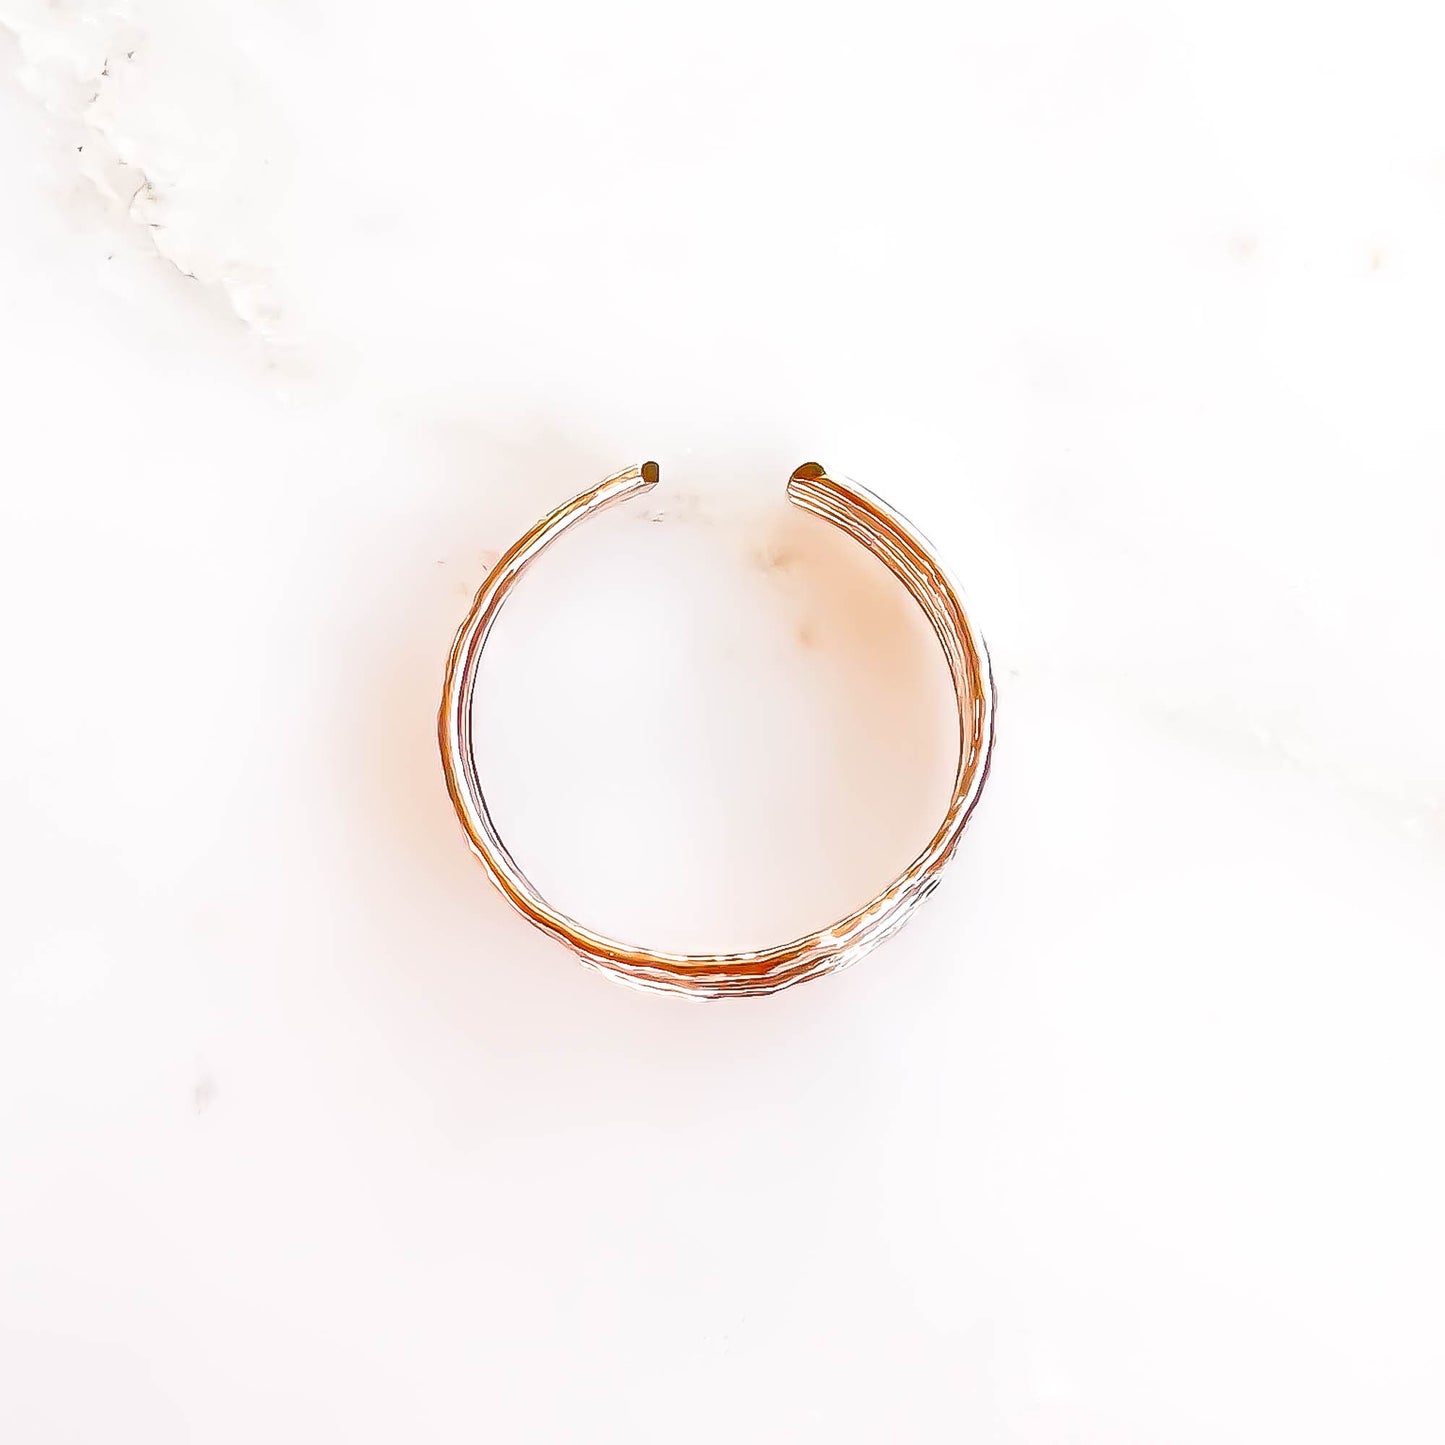 4 Line Toe Ring, 14K Rose Gold Filled and Sterling Silver